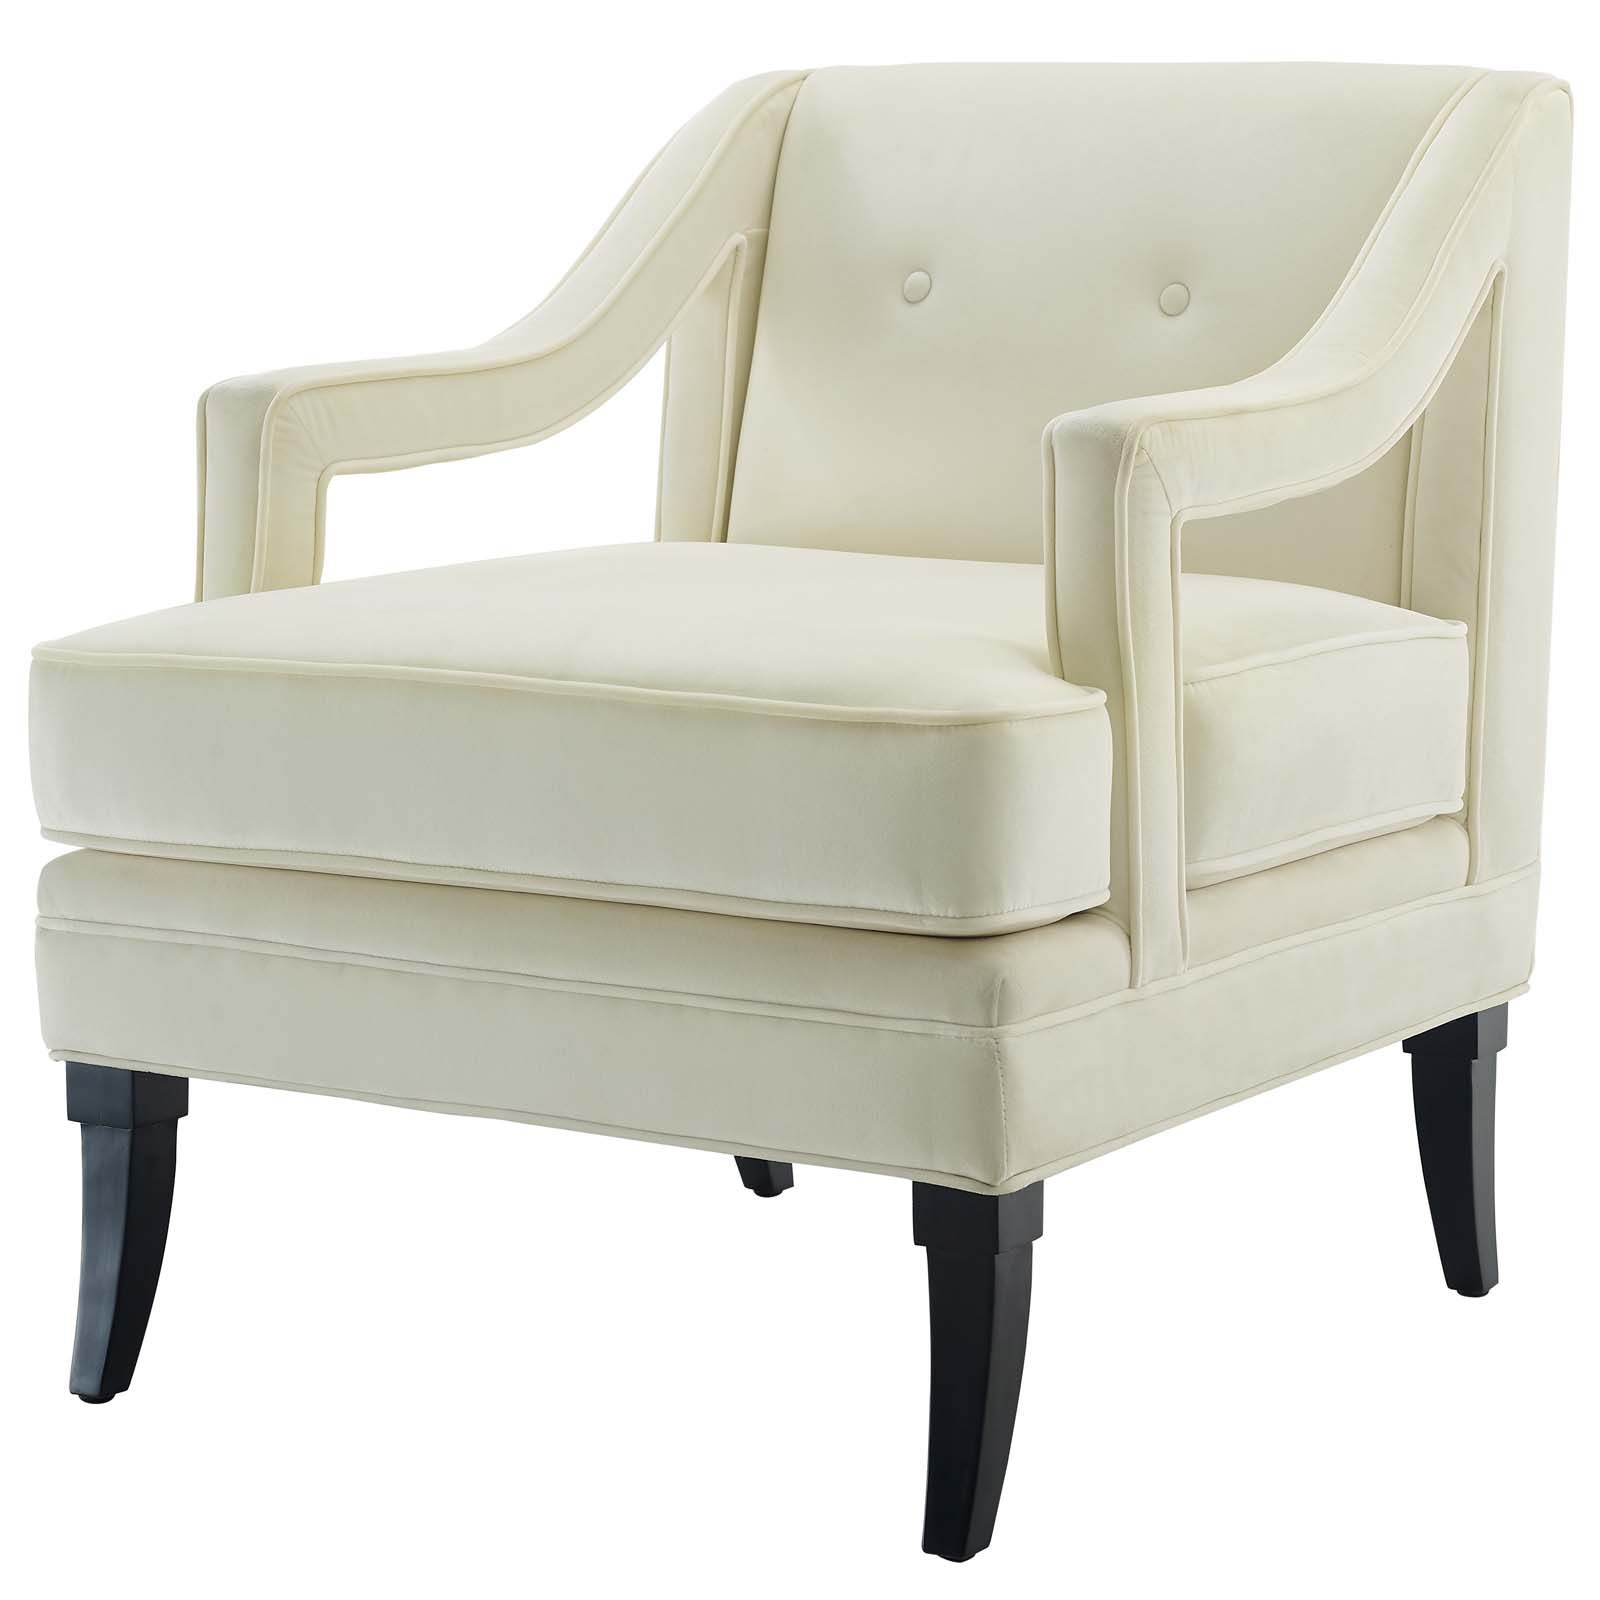 Ivory Button Tufted Vanity Stools Inside Popular Concur Button Tufted Upholstered Velvet Armchair Ivory (View 8 of 10)